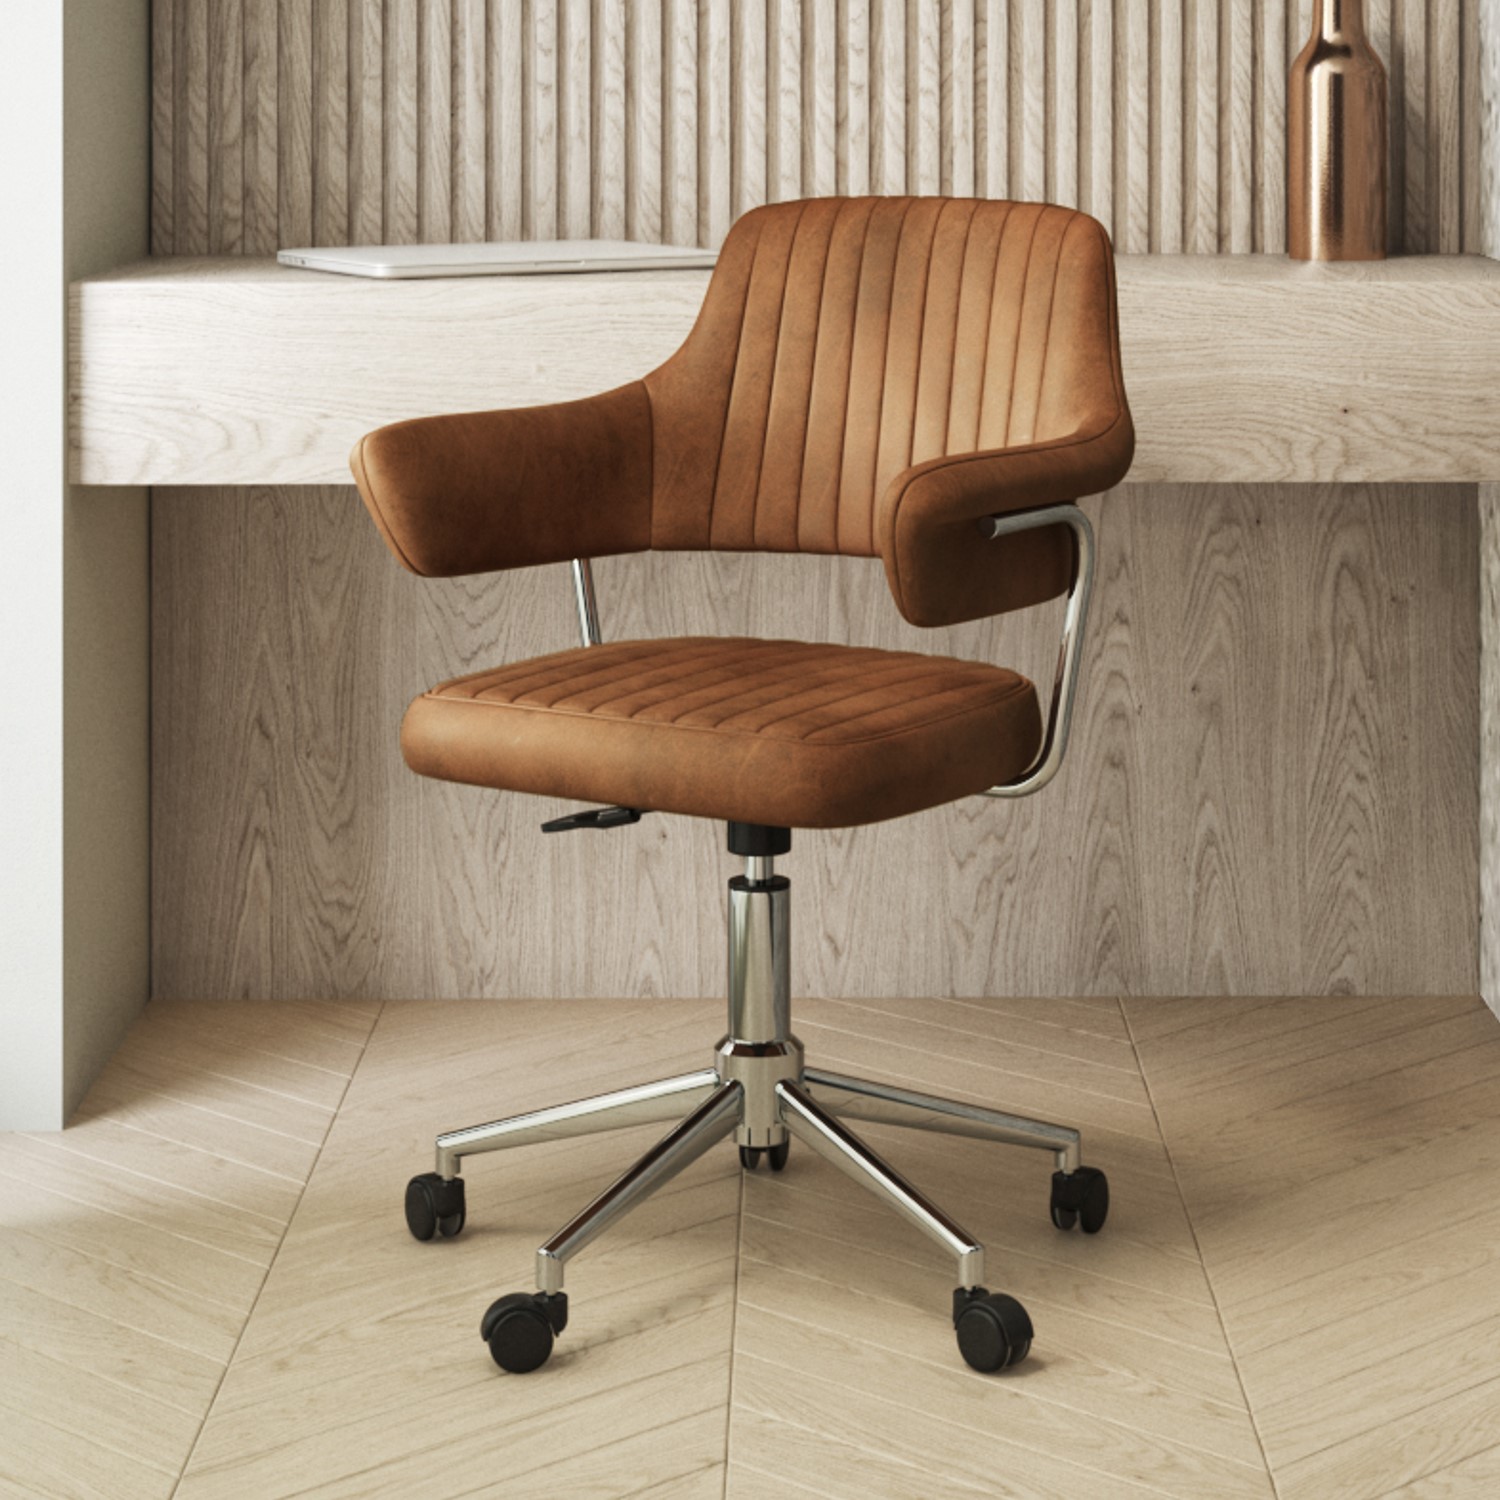 Read more about Tan faux leather swivel office chair with arms fenix